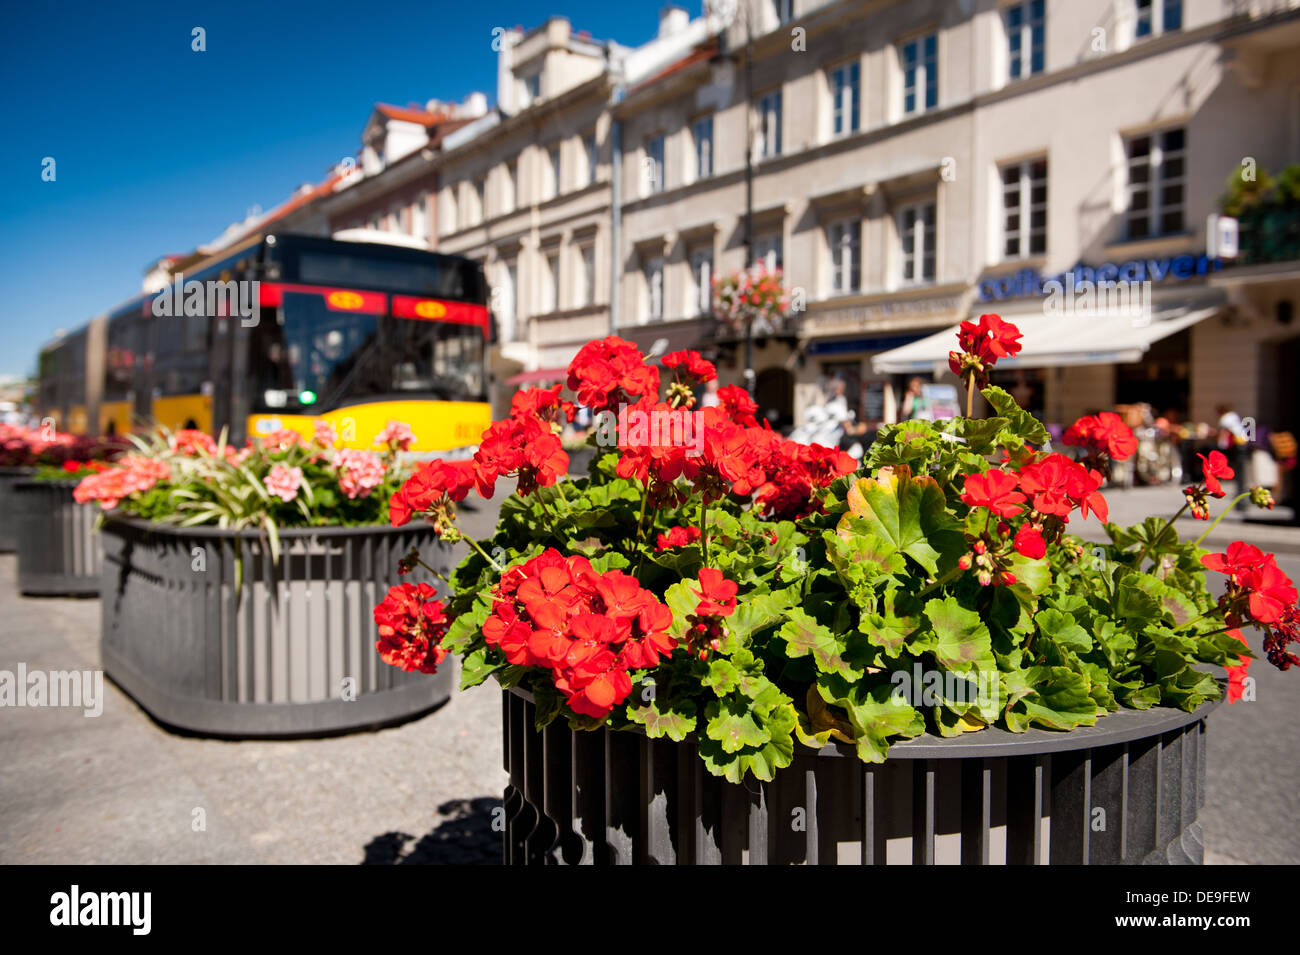 Nowy Swiat street and red geranium flowers Stock Photo